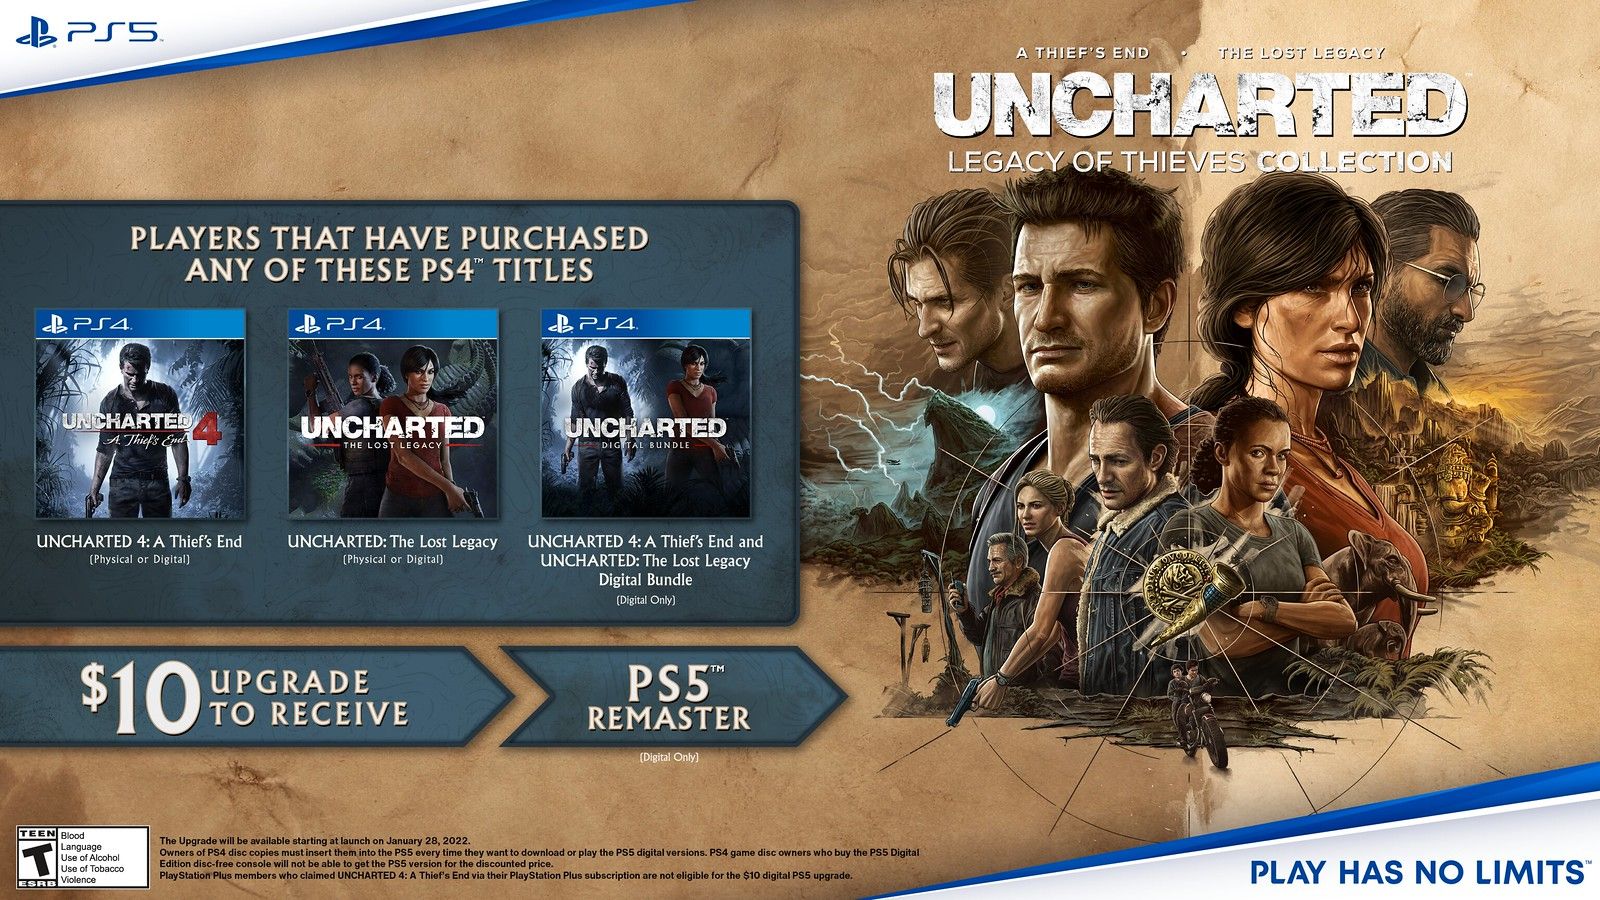 Uncharted Legacy of Thieves 